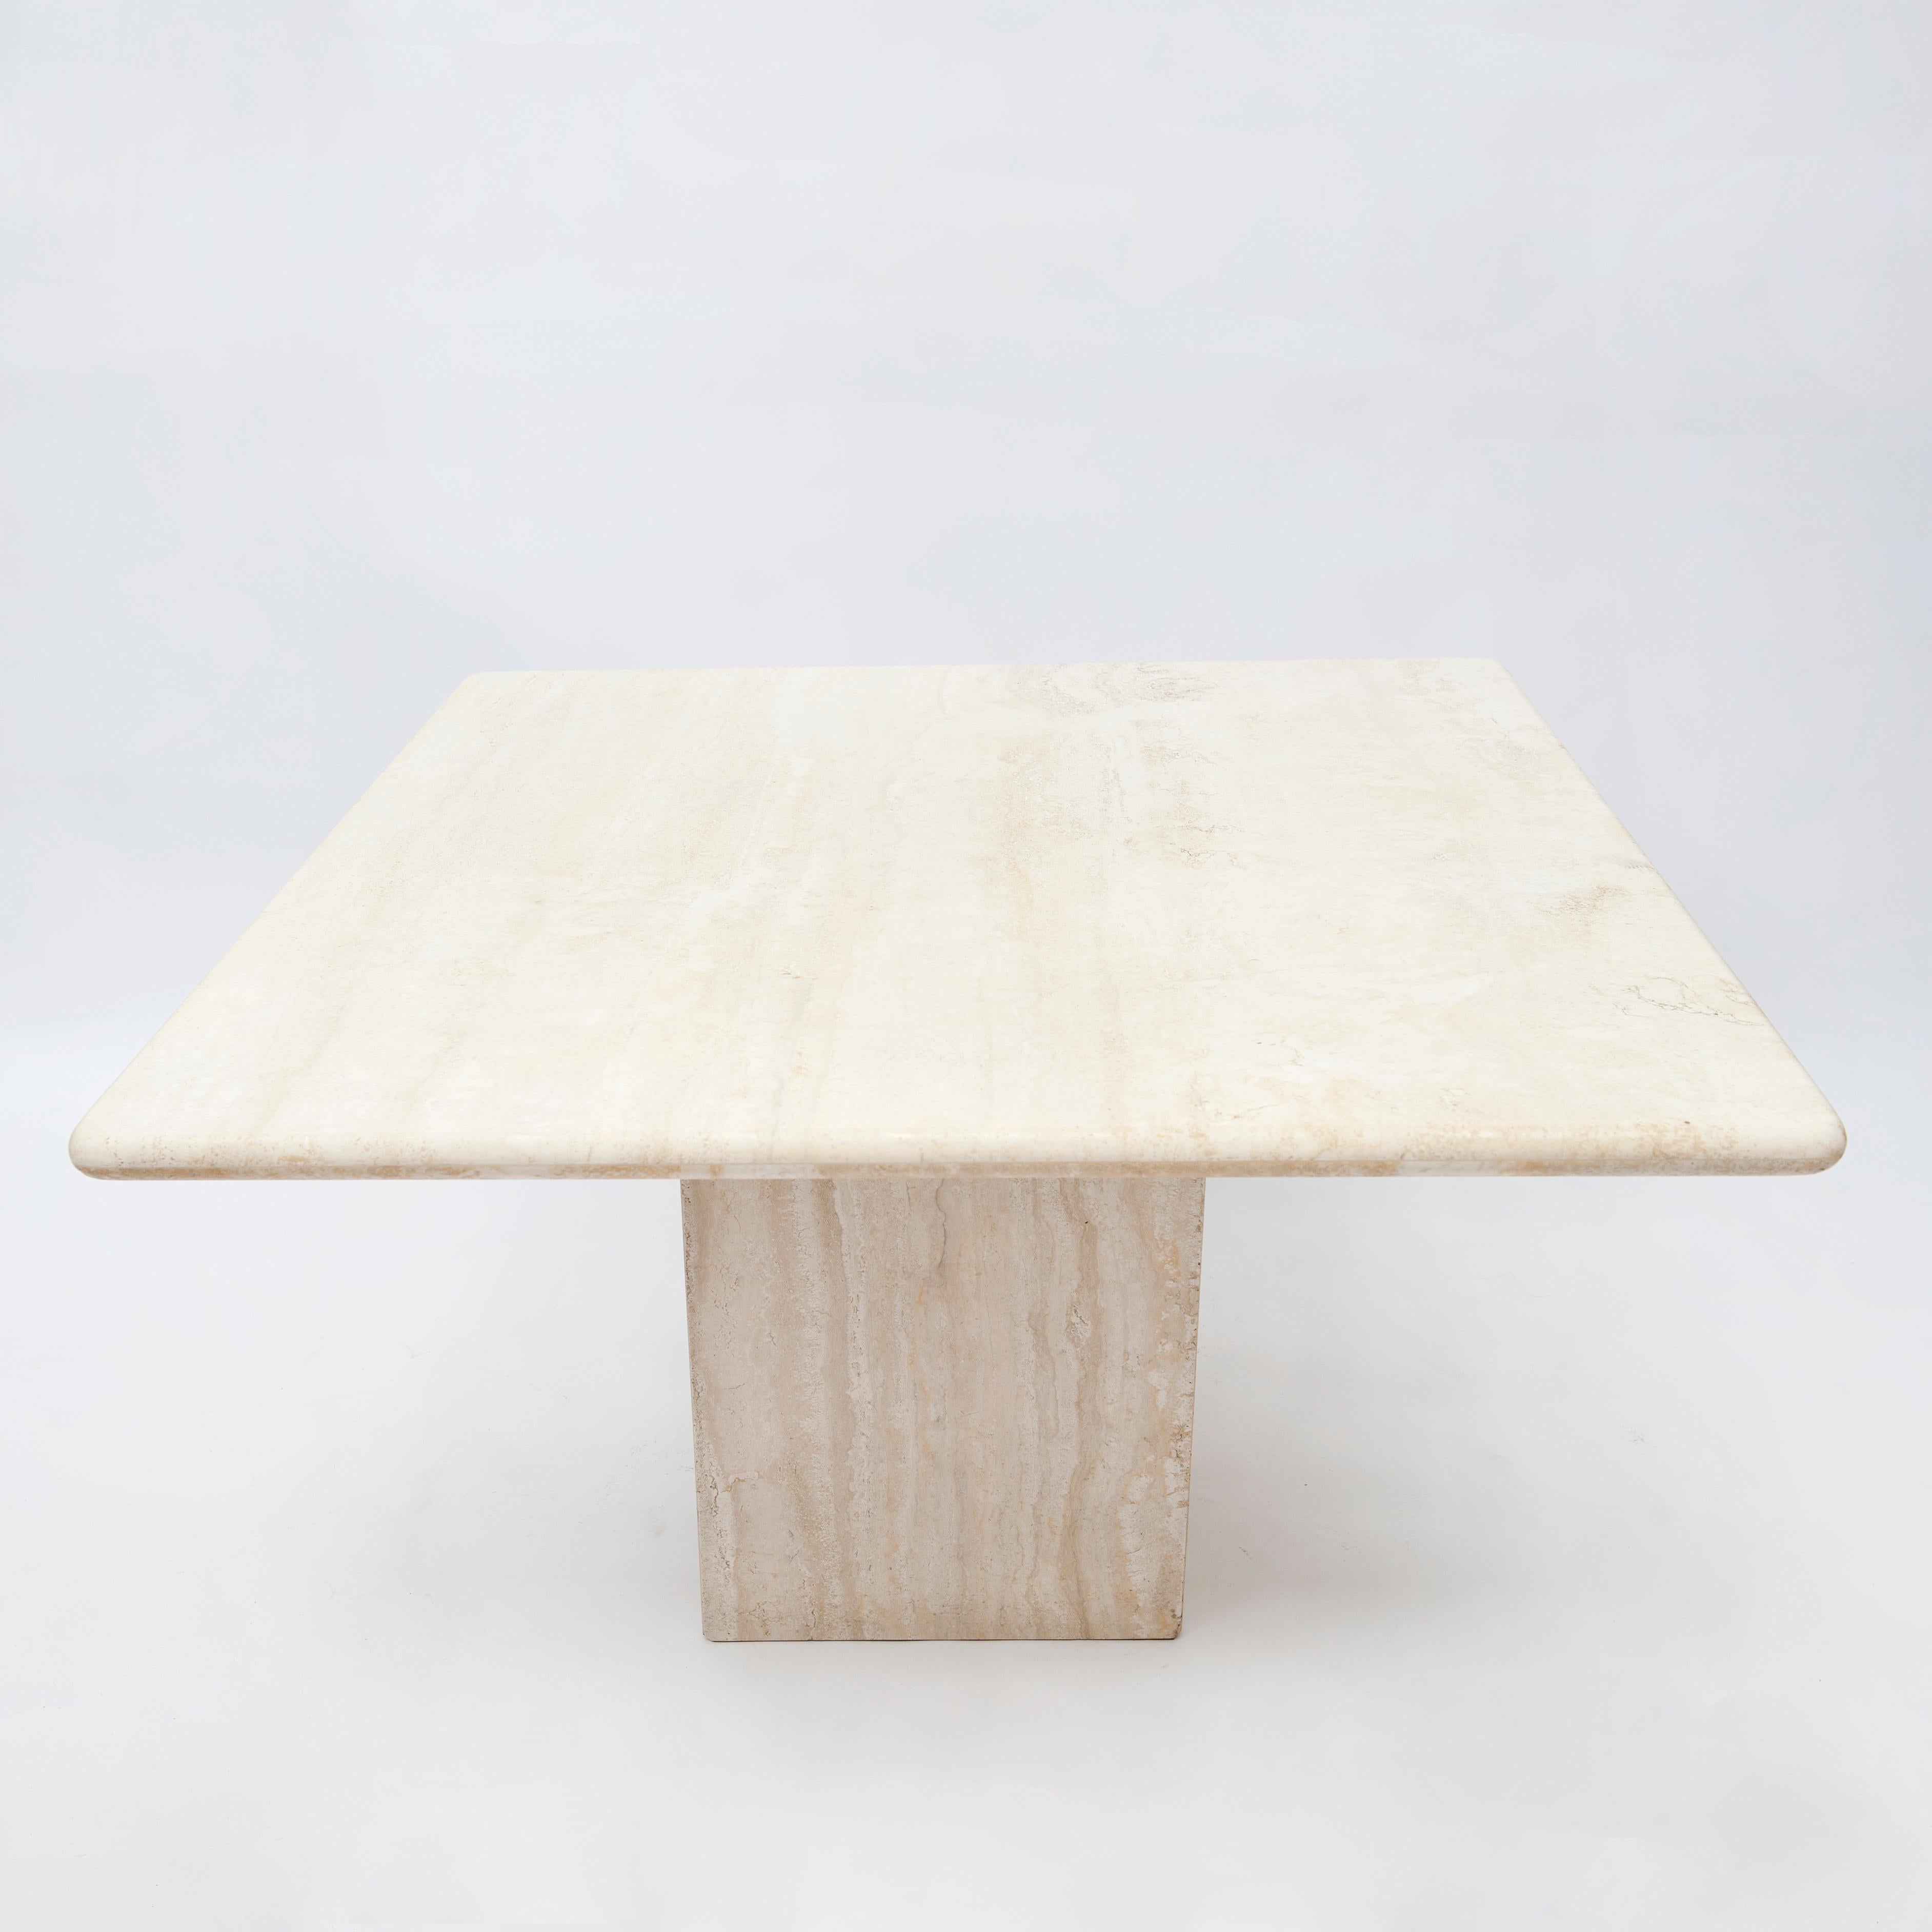 Italian travertine dining table produced end 1970s-begin 1980s. The condition is very good without any damages or repairs. The square top measures 120 x 120 cm. H 72 cm. The minimalistic simplicity of design would compliment many design projects.